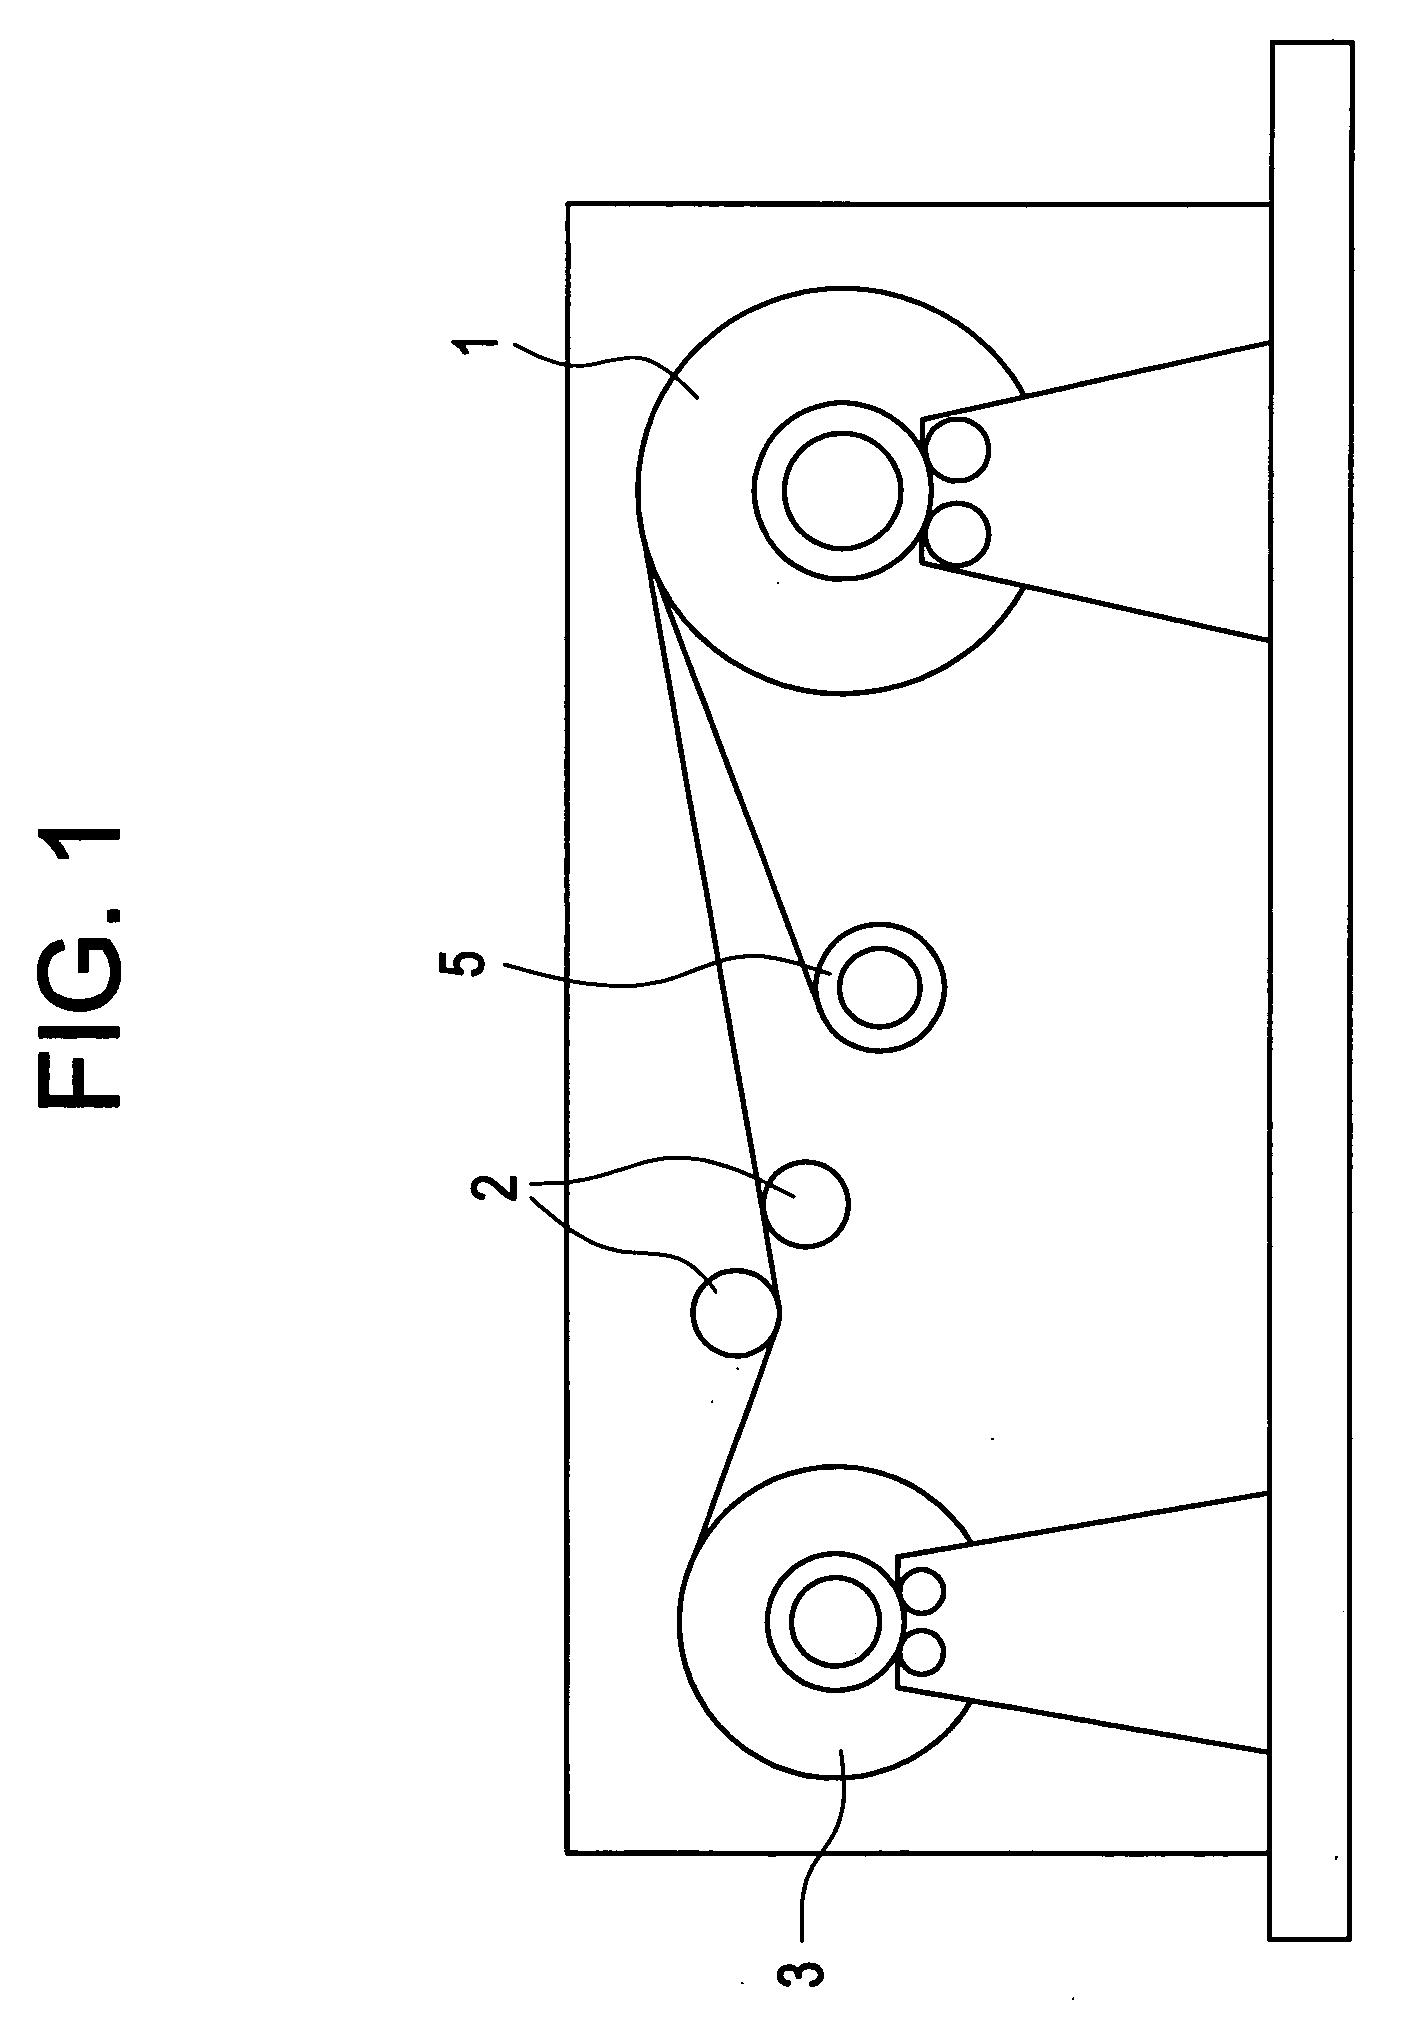 Method and apparatus for magnetizing a permanent magnet